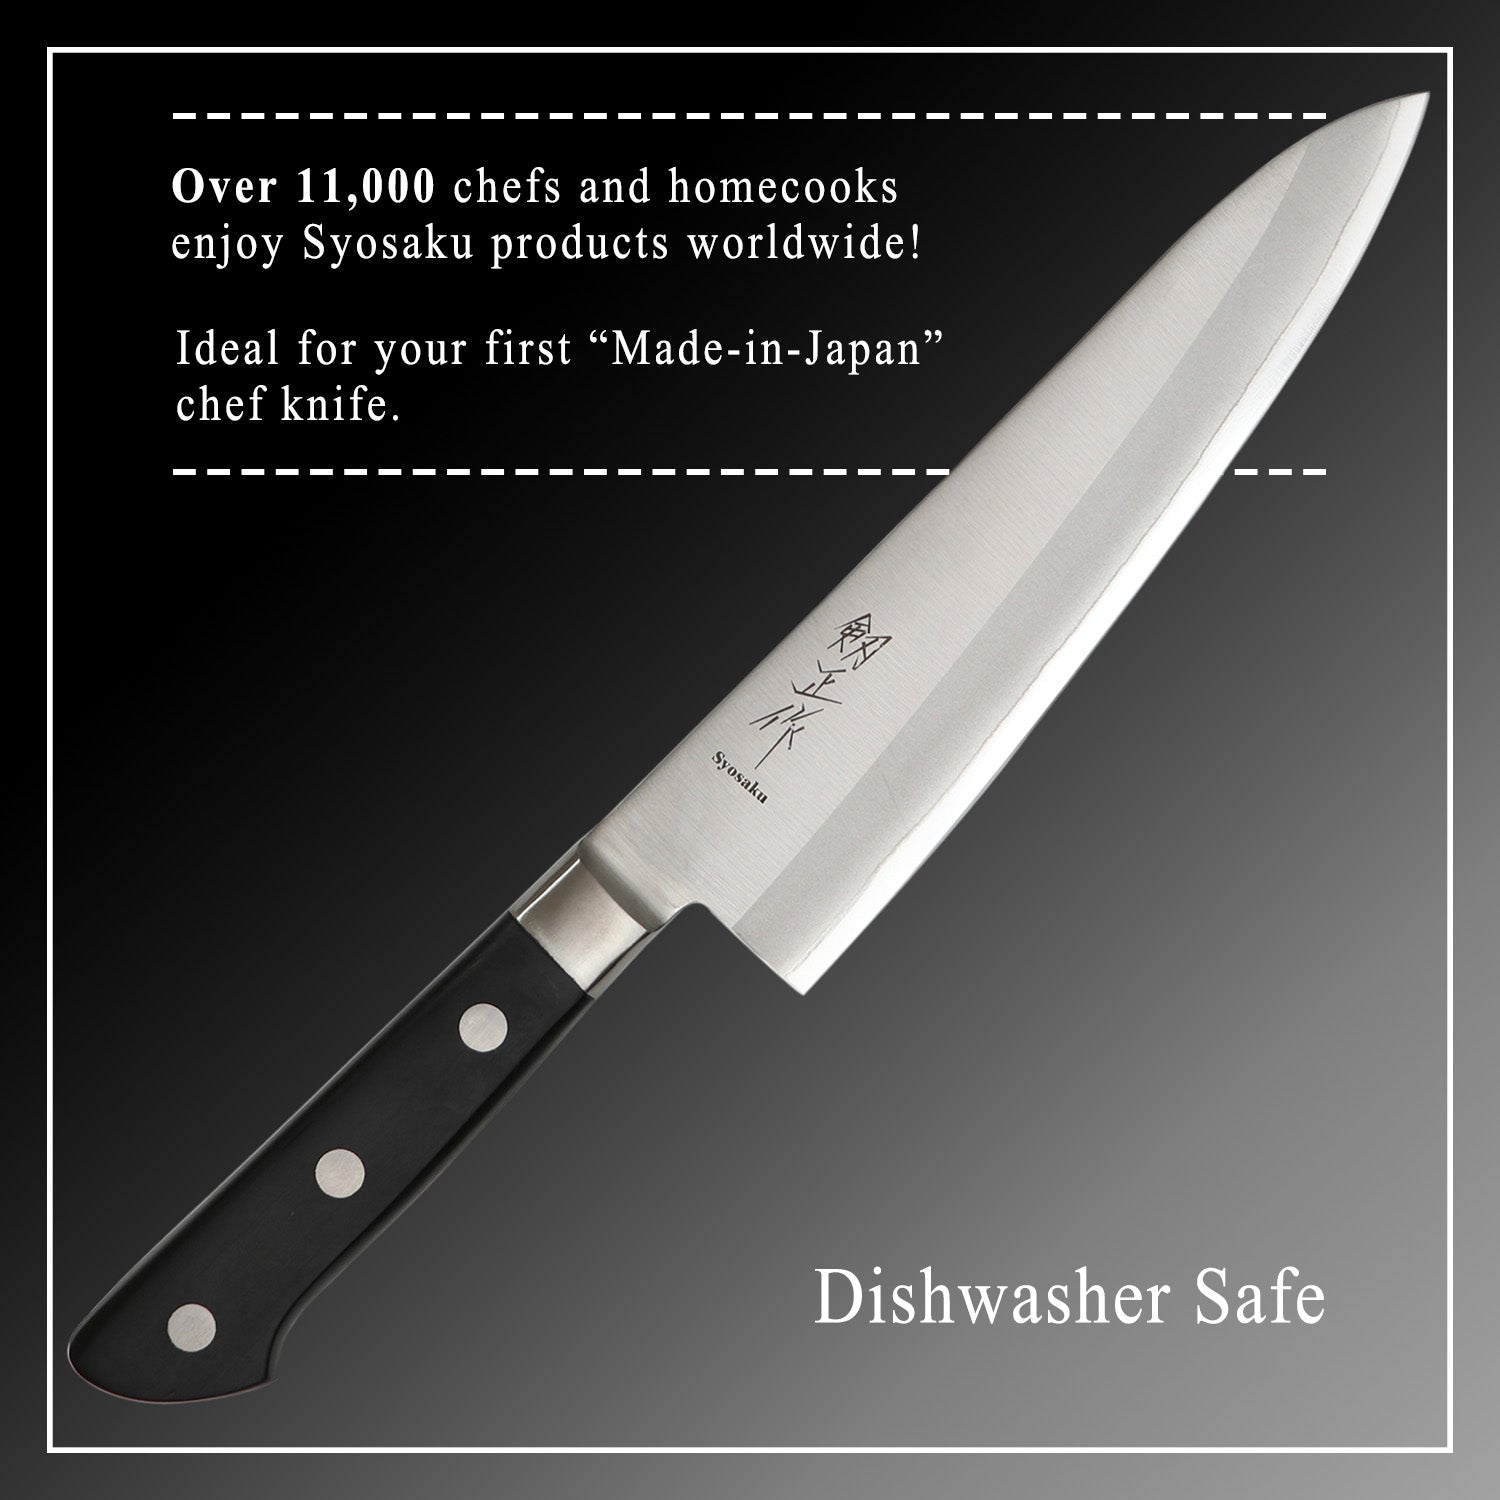 Knife descriptions and codes with statistics from the blade sharpness